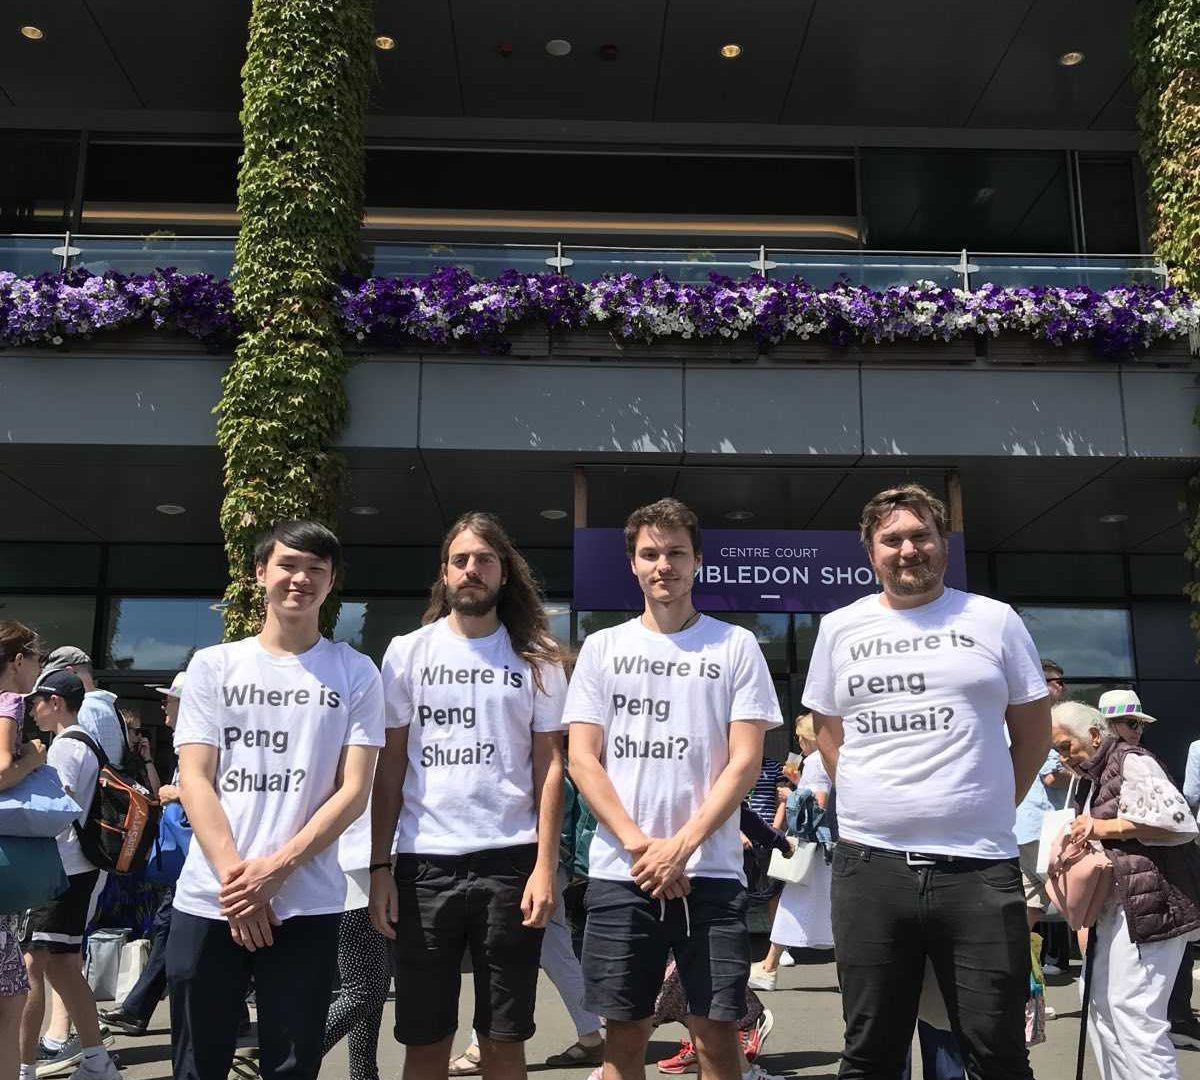 Free Tibet activists were stopped by members of Wimbledon's security for wearing "Where is Peng Shuai" tee-shirts ©Free Tibet